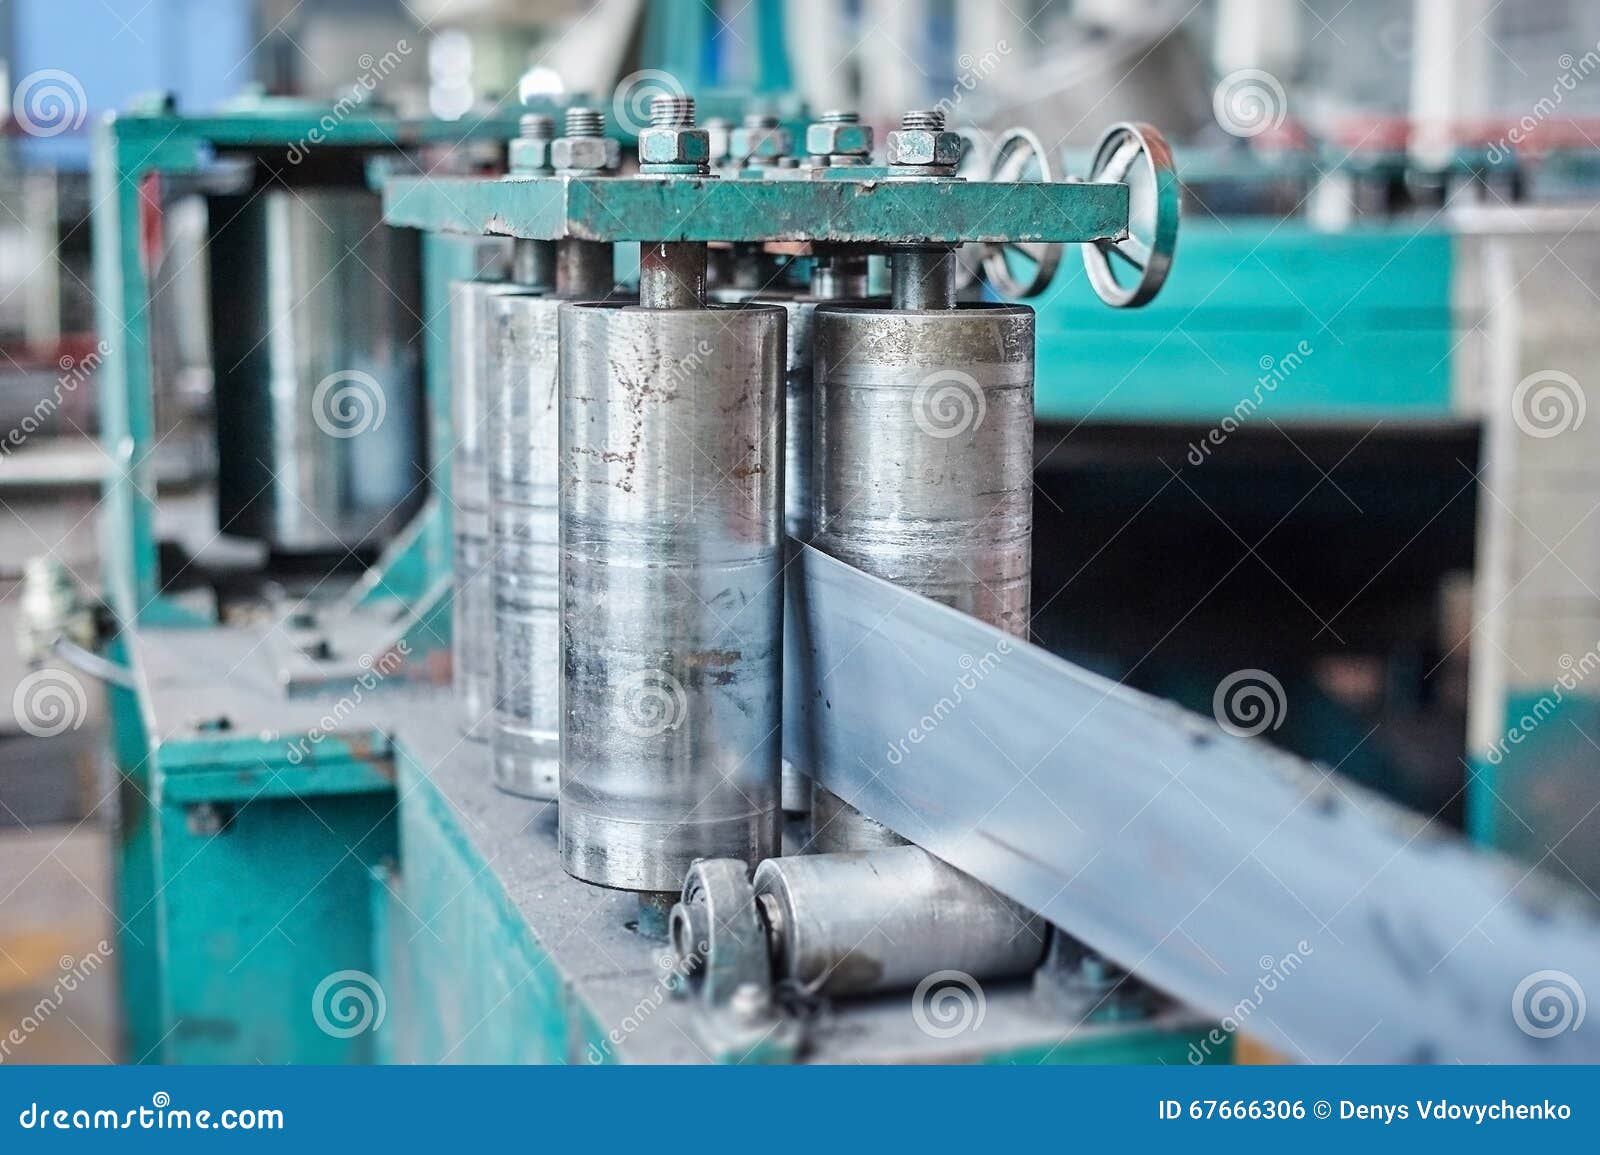 Rolling Mill Machine For Rolling Steel Sheet Stock Photo Image of press, machinery 67666306